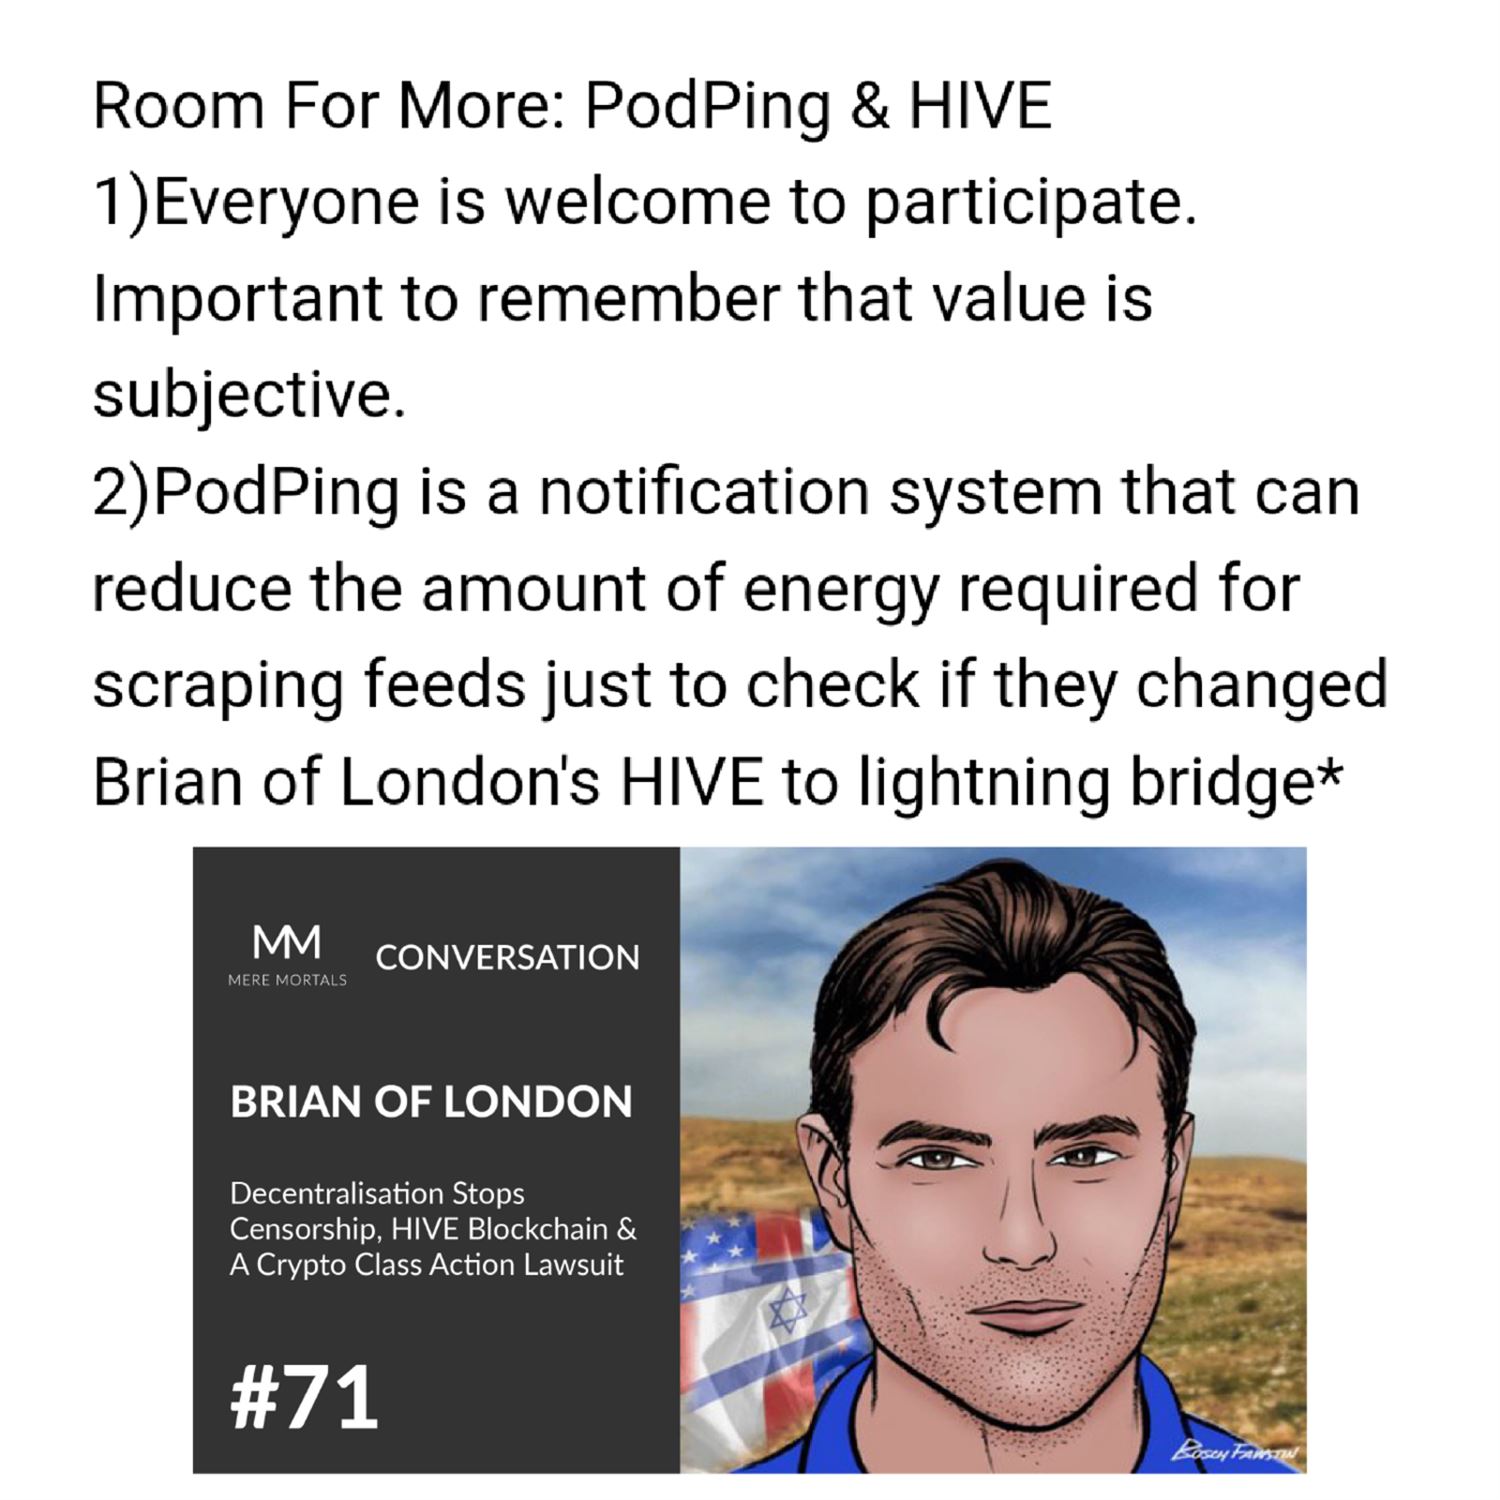 Room For More: PodPing & HIVE